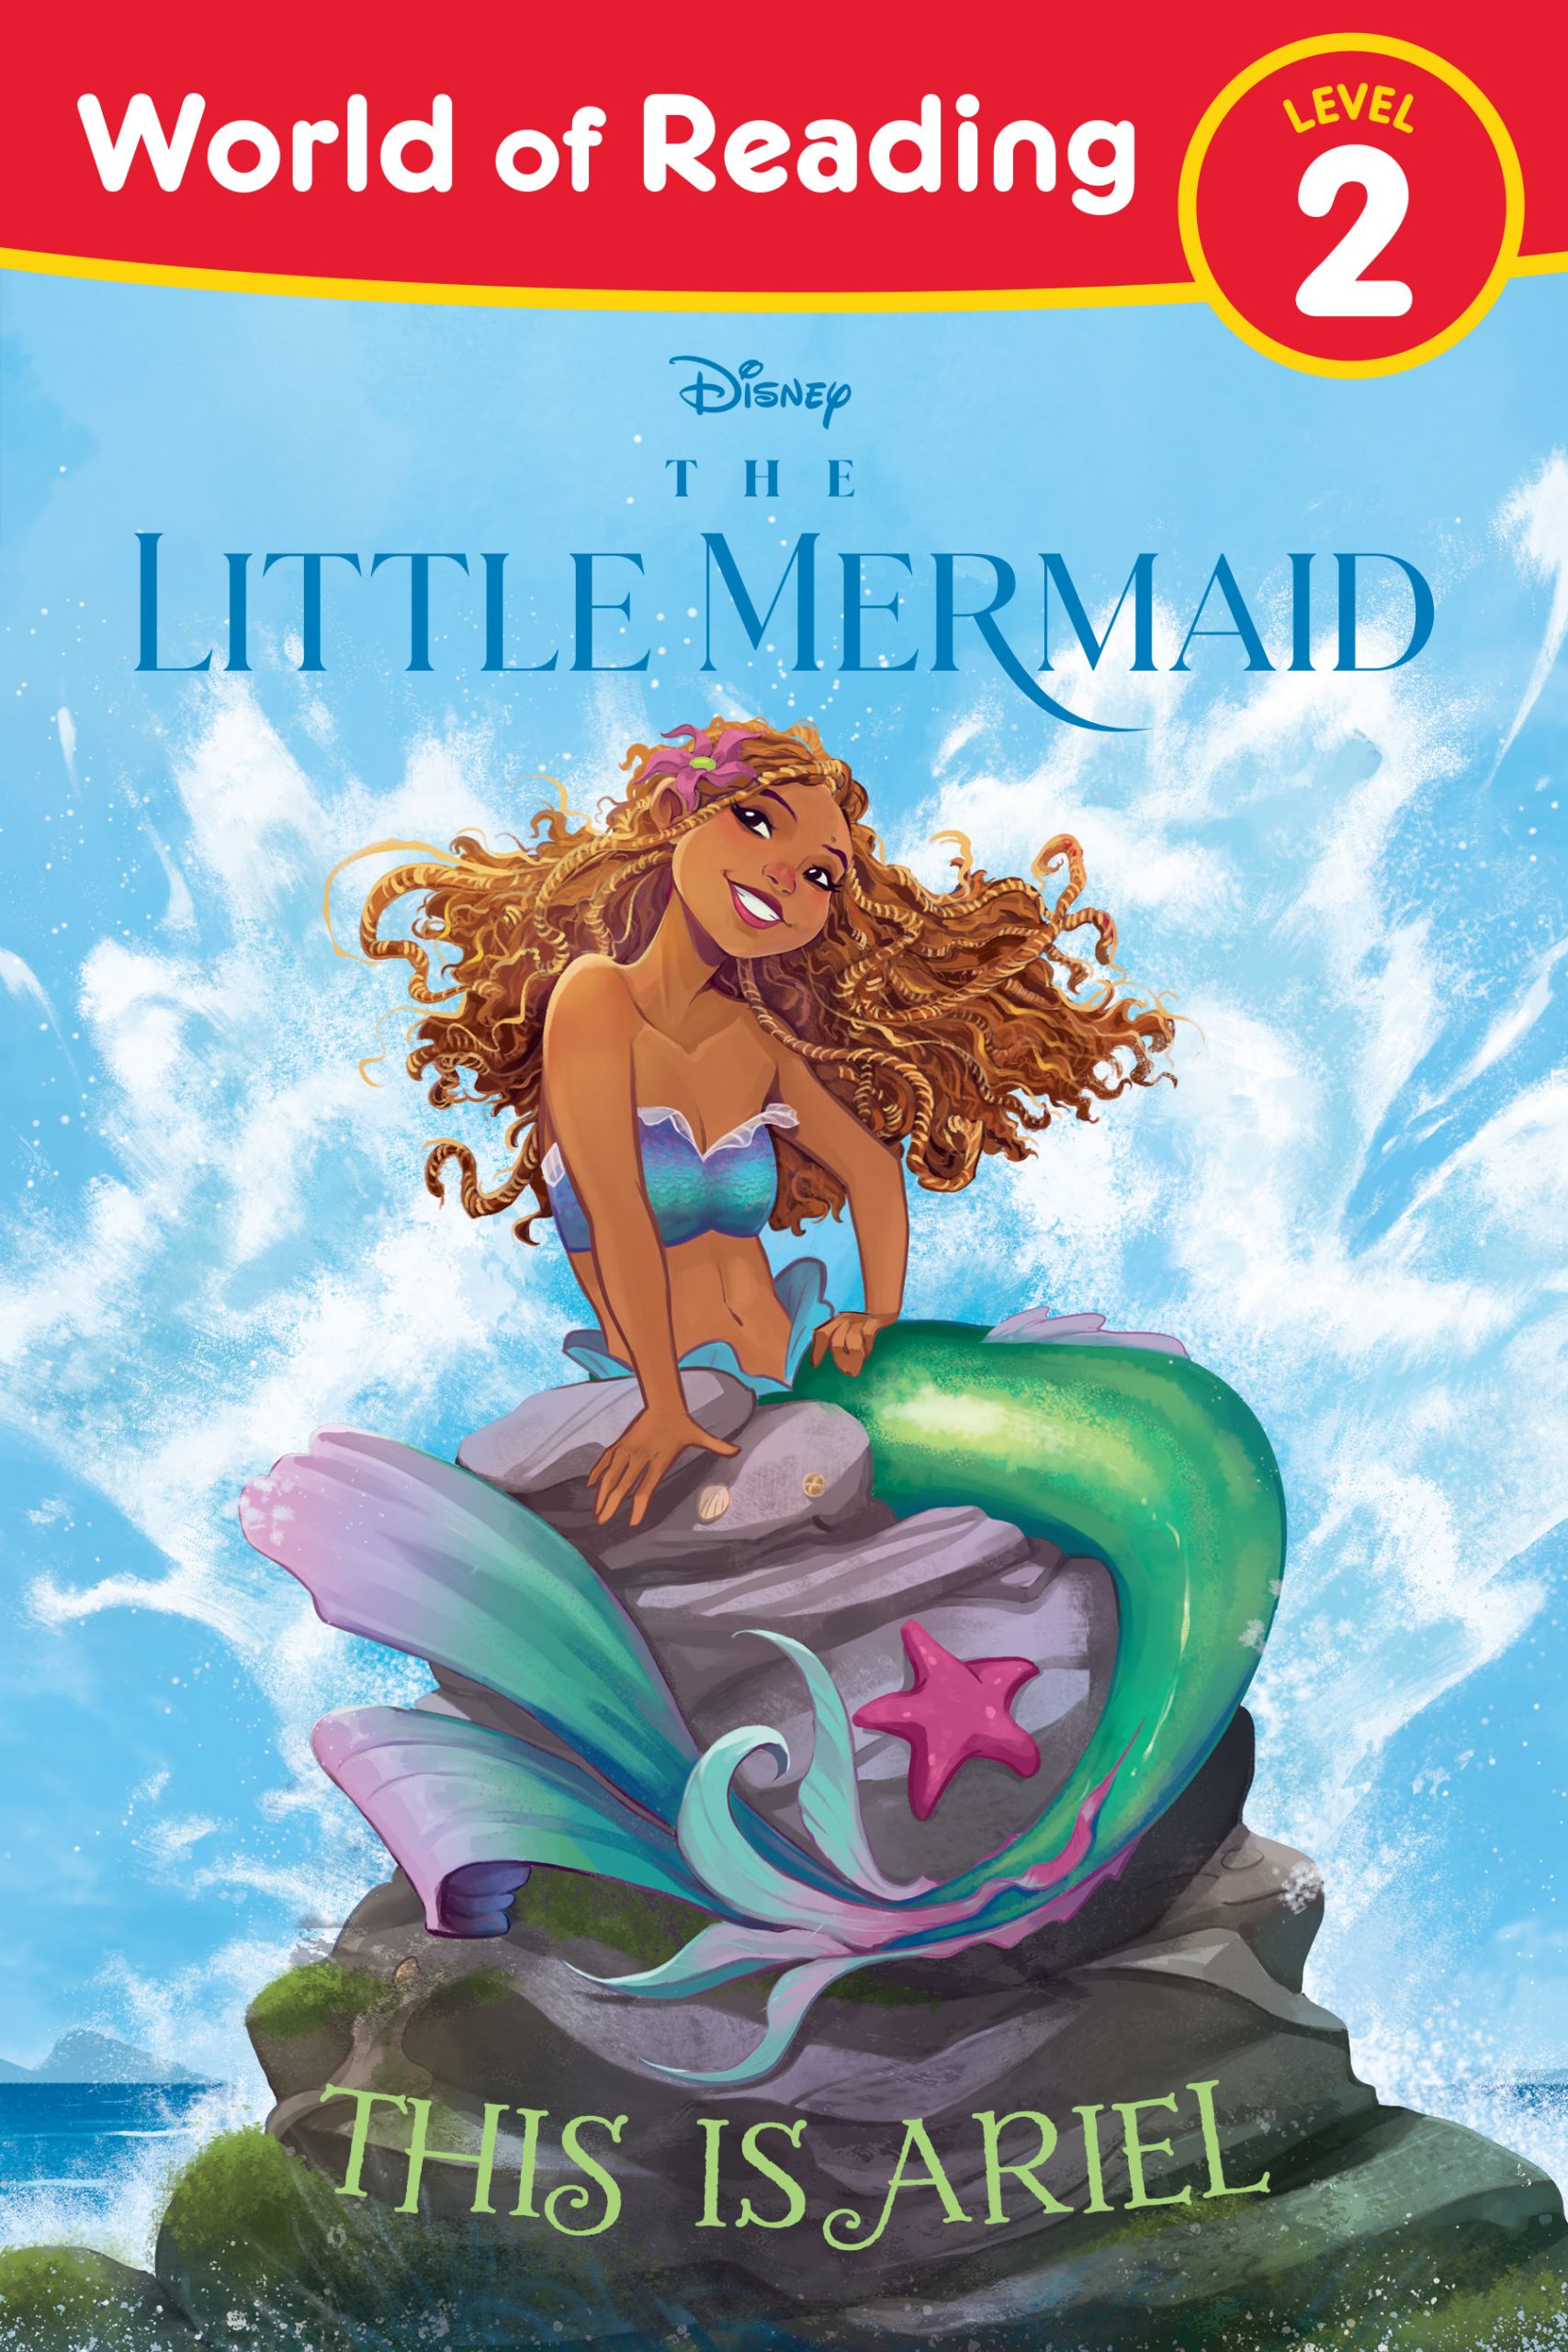 Books　Little　is　Ariel　The　Mermaid:　by　Hosten　Mermaid　This　Little　The　Colin